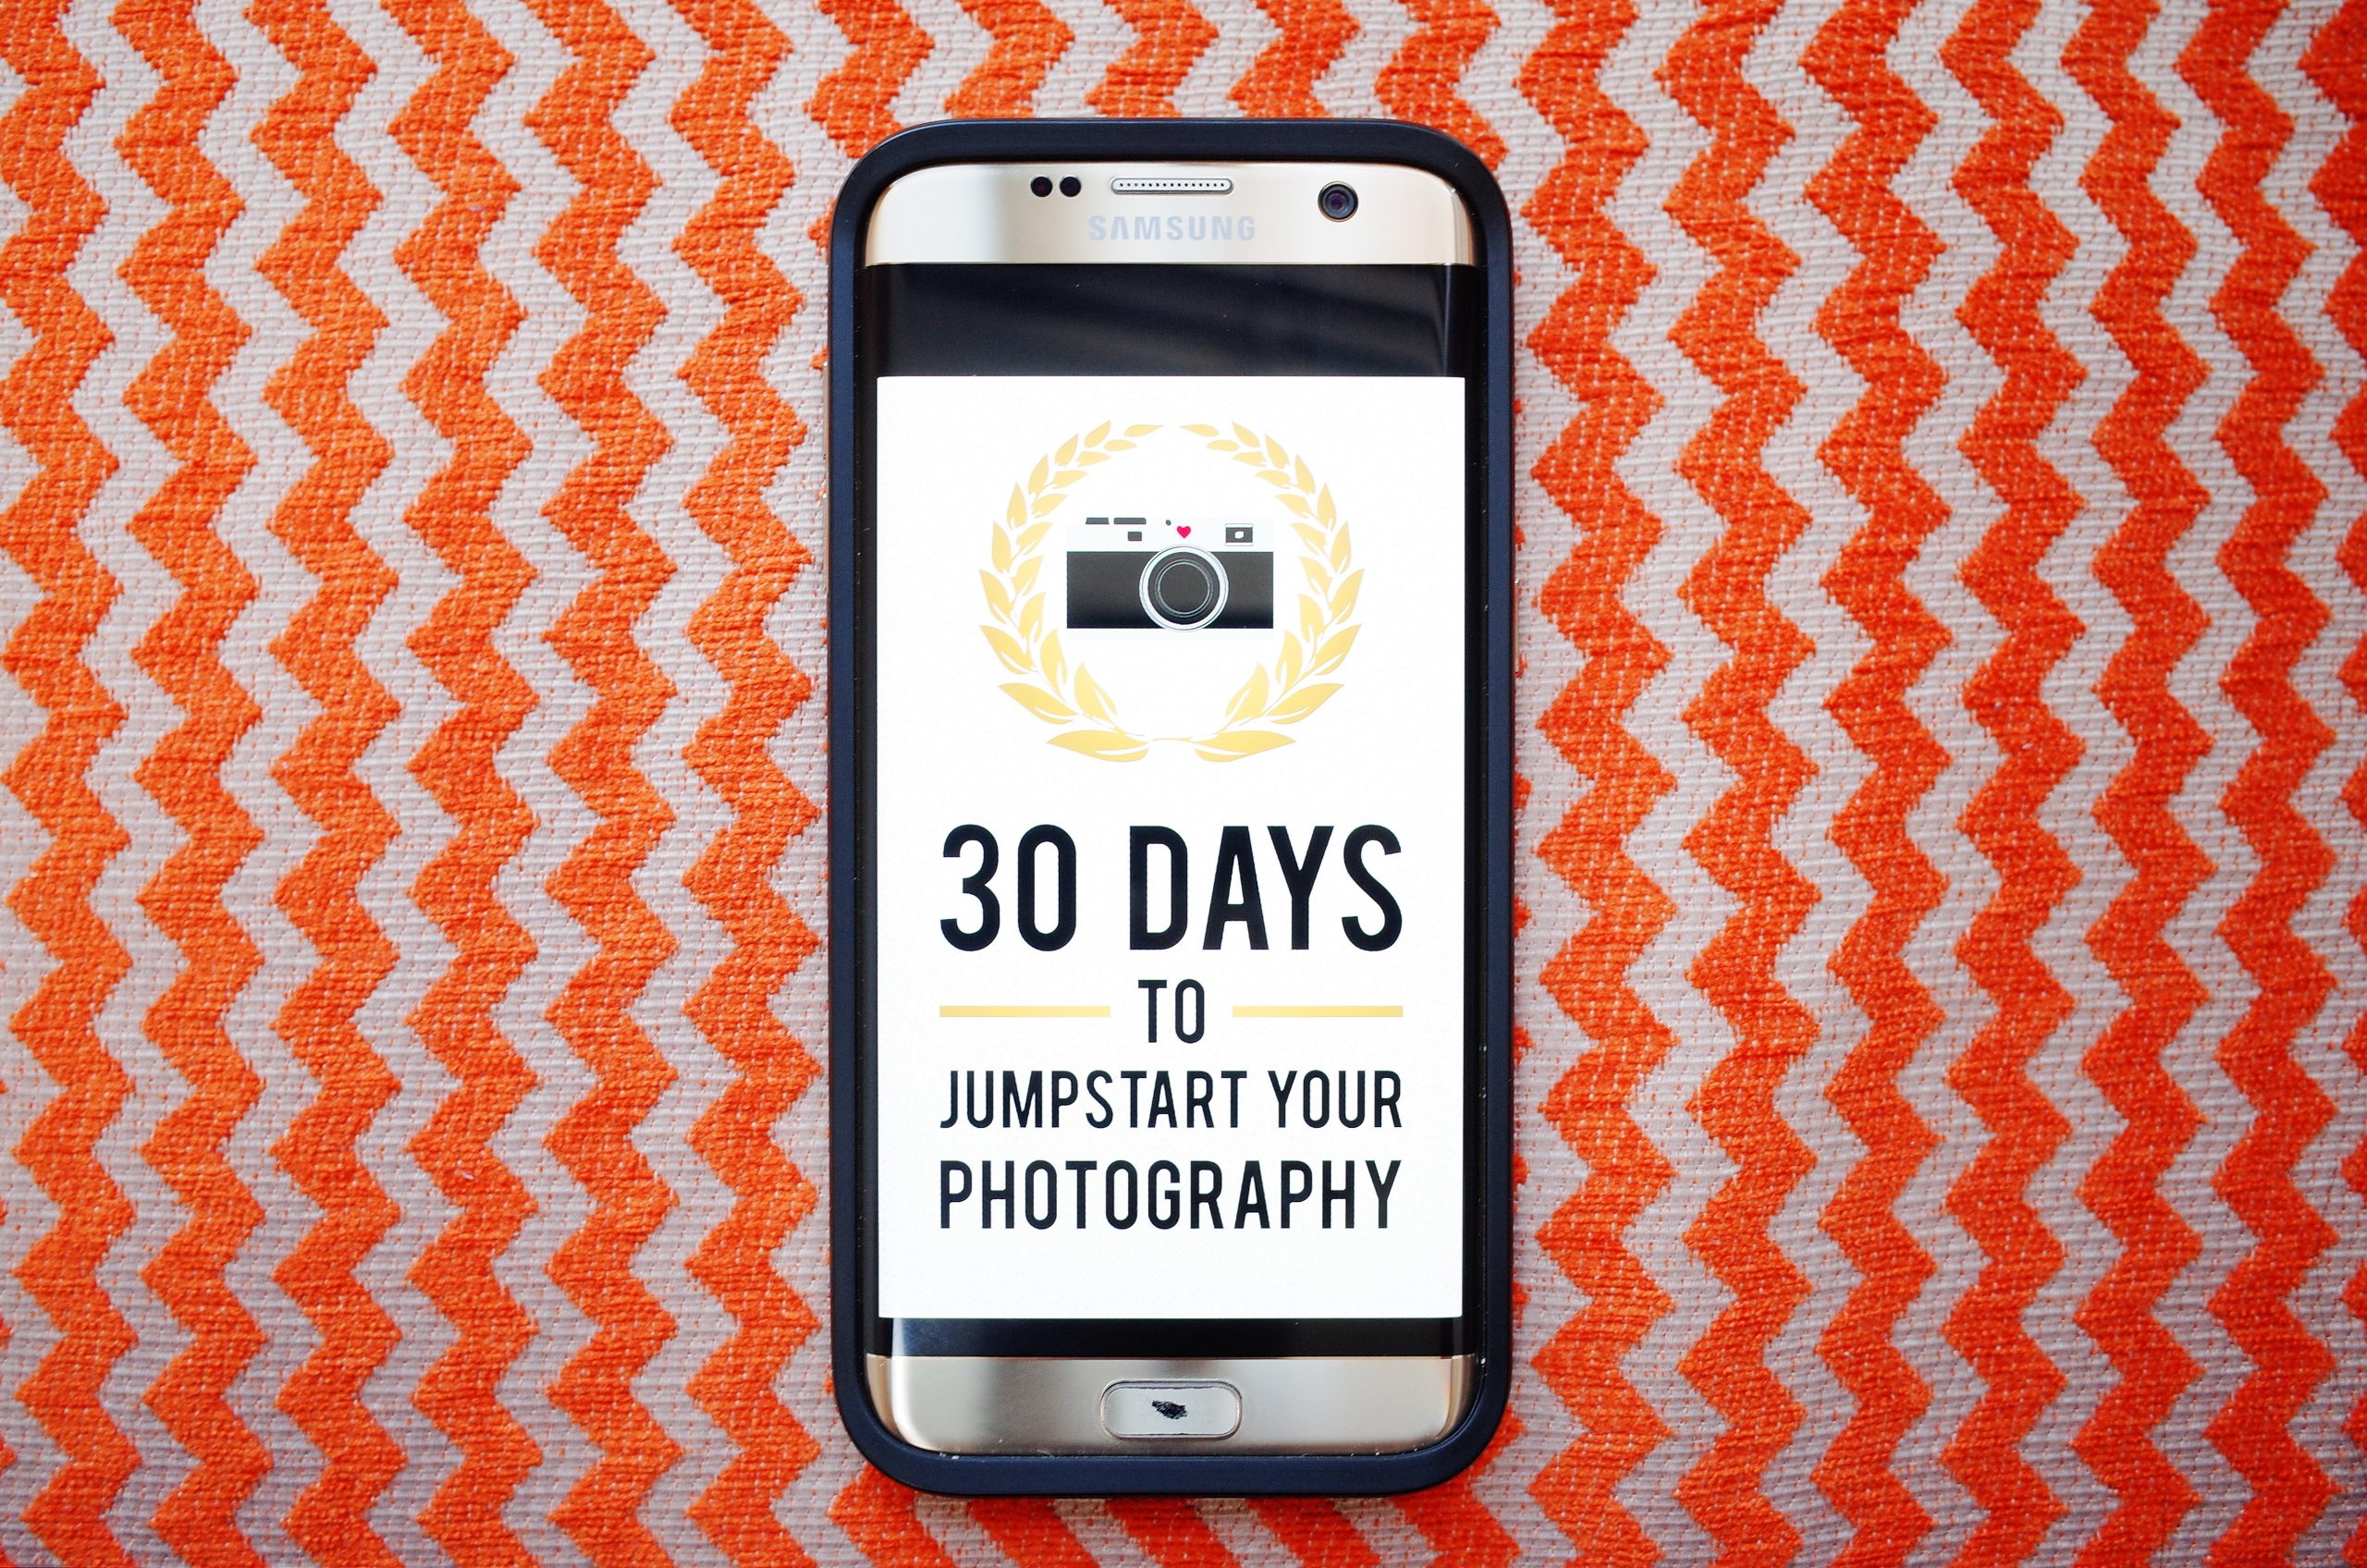 New eBook: 30 DAYS TO JUMPSTART YOUR PHOTOGRAPHY